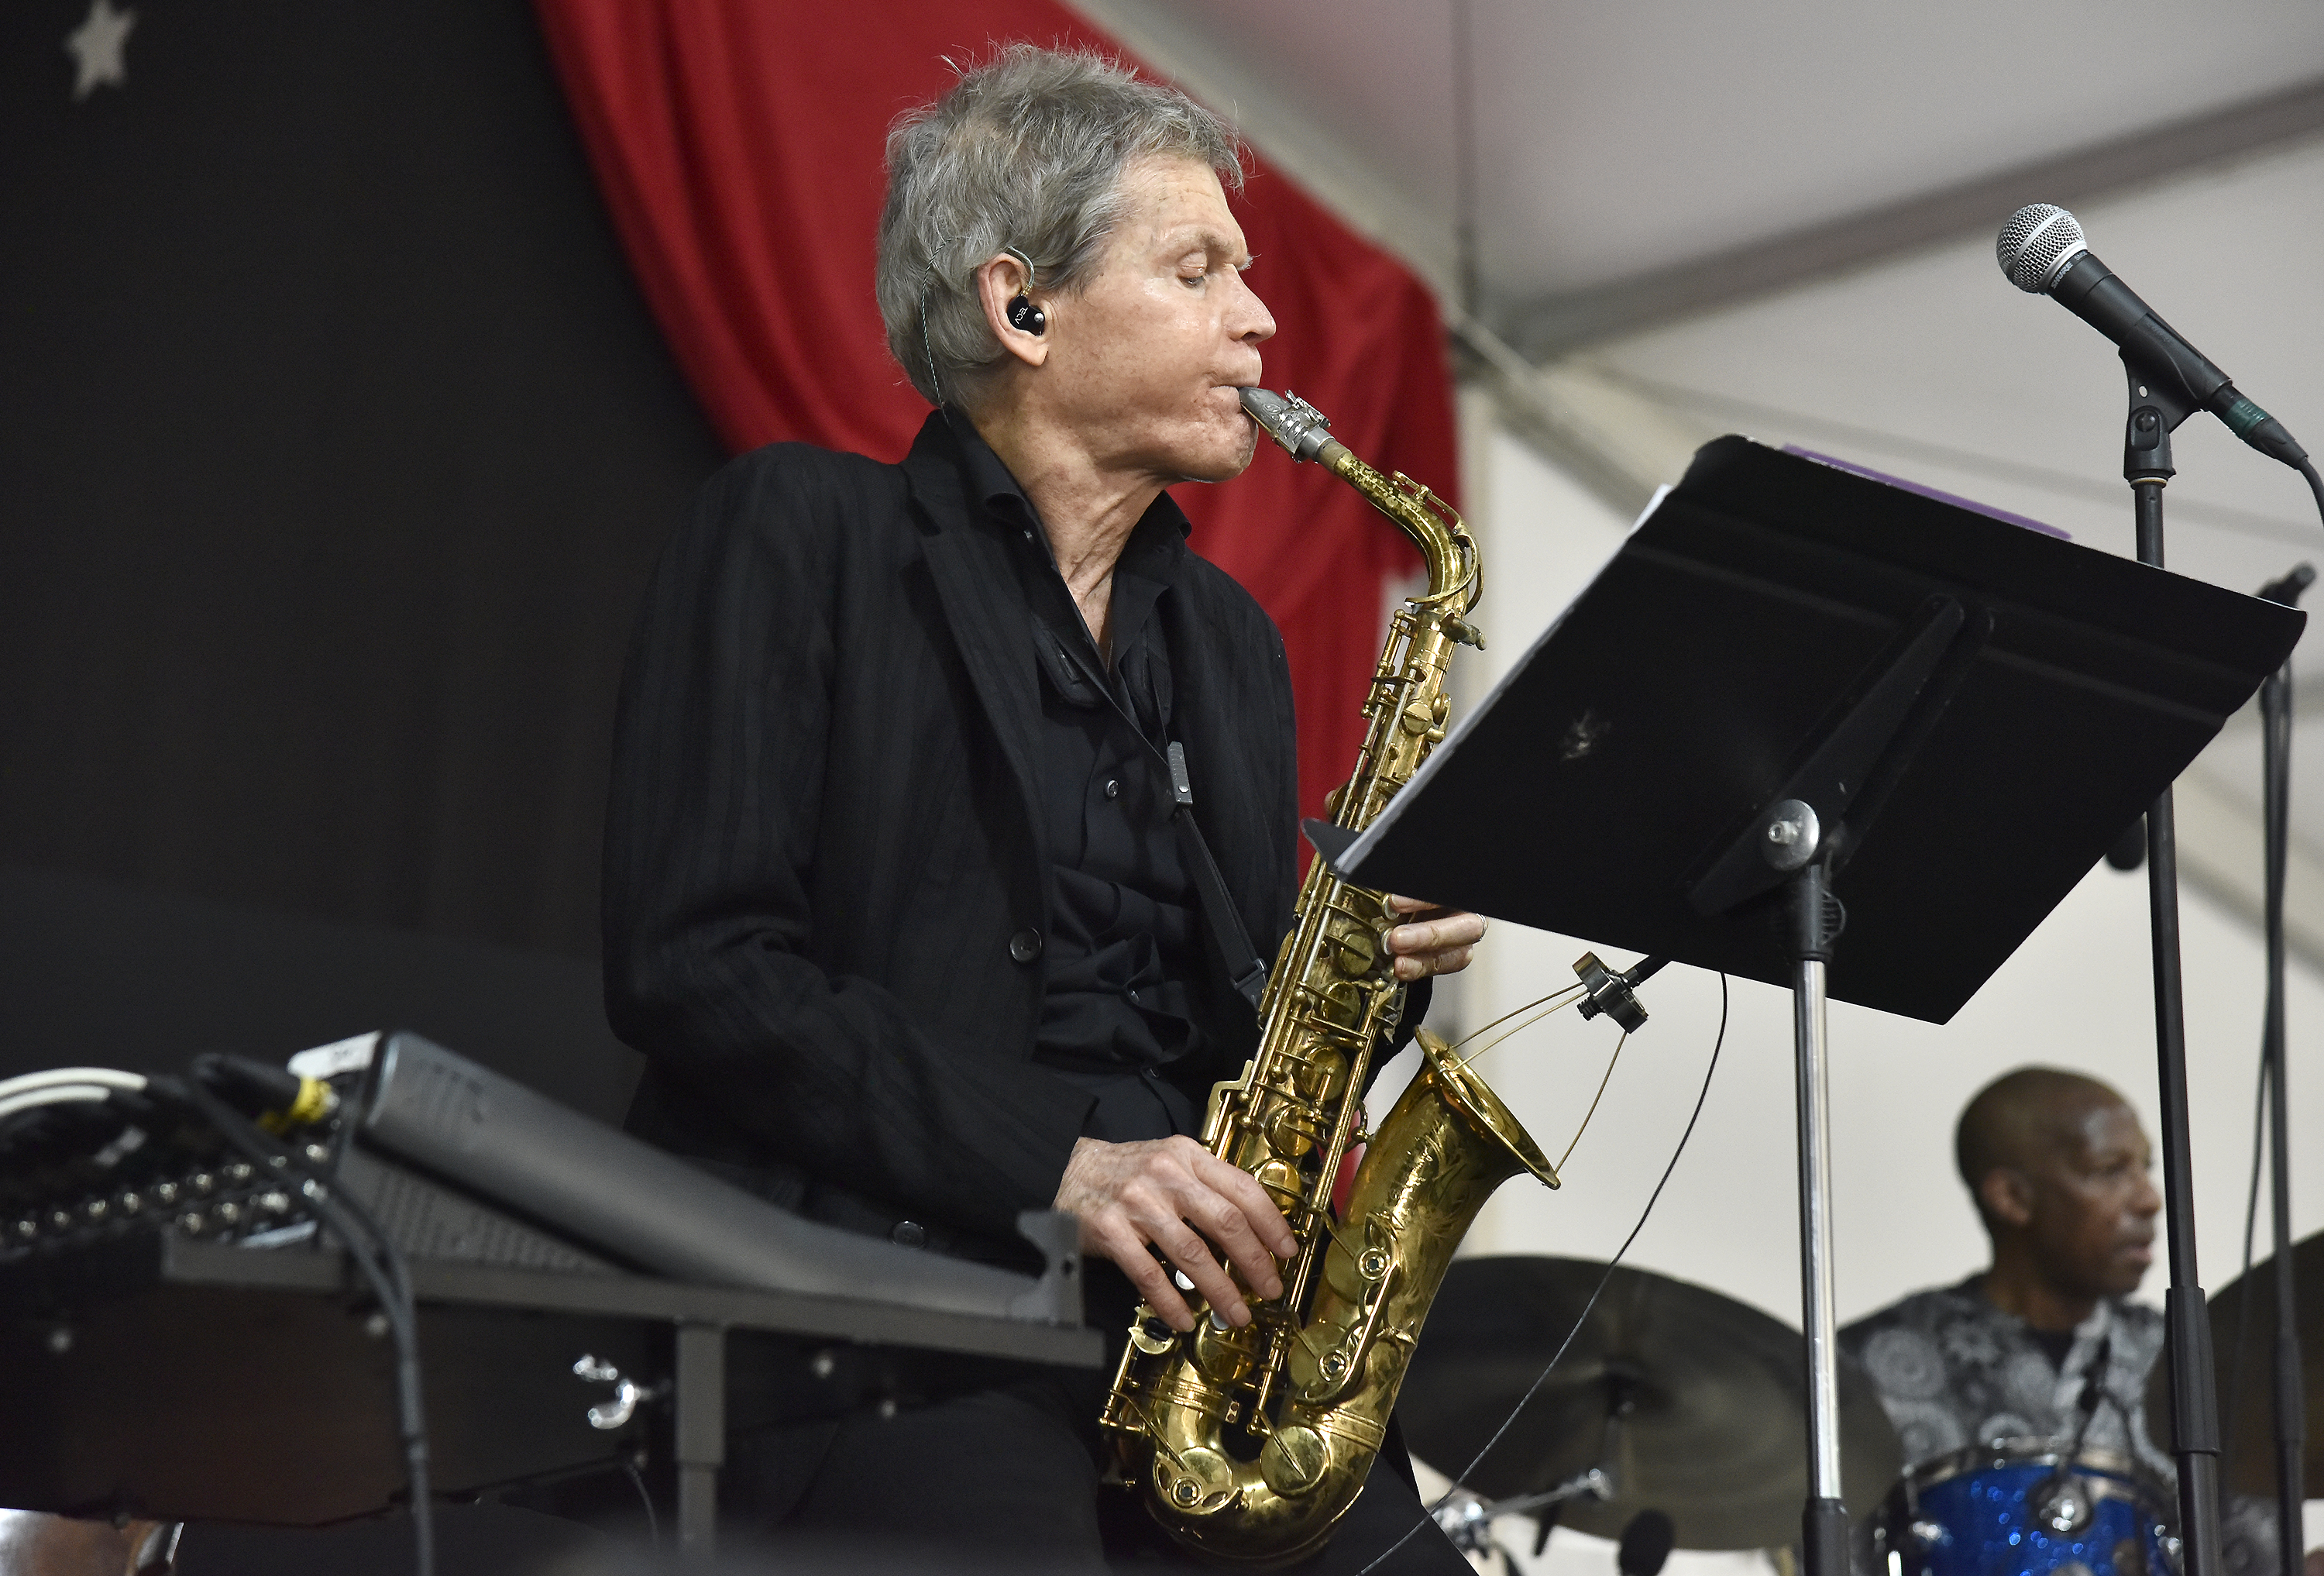 He is seen here performing during the 2022 New Orleans Jazz and Heritage Festival